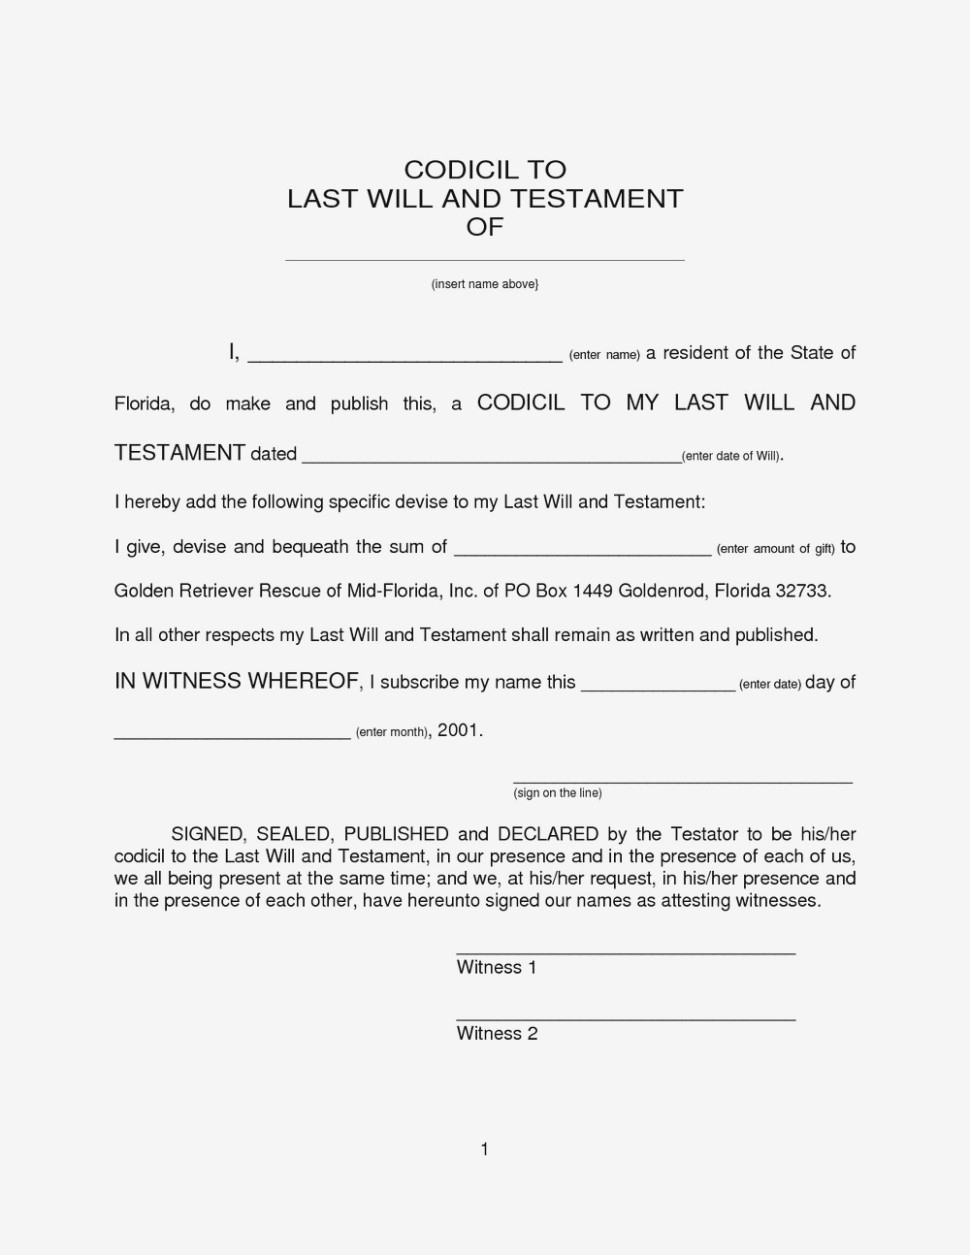 Free Printable Last Will And Testament Forms Nz | Resume Examples - Free Printable Last Will And Testament Forms